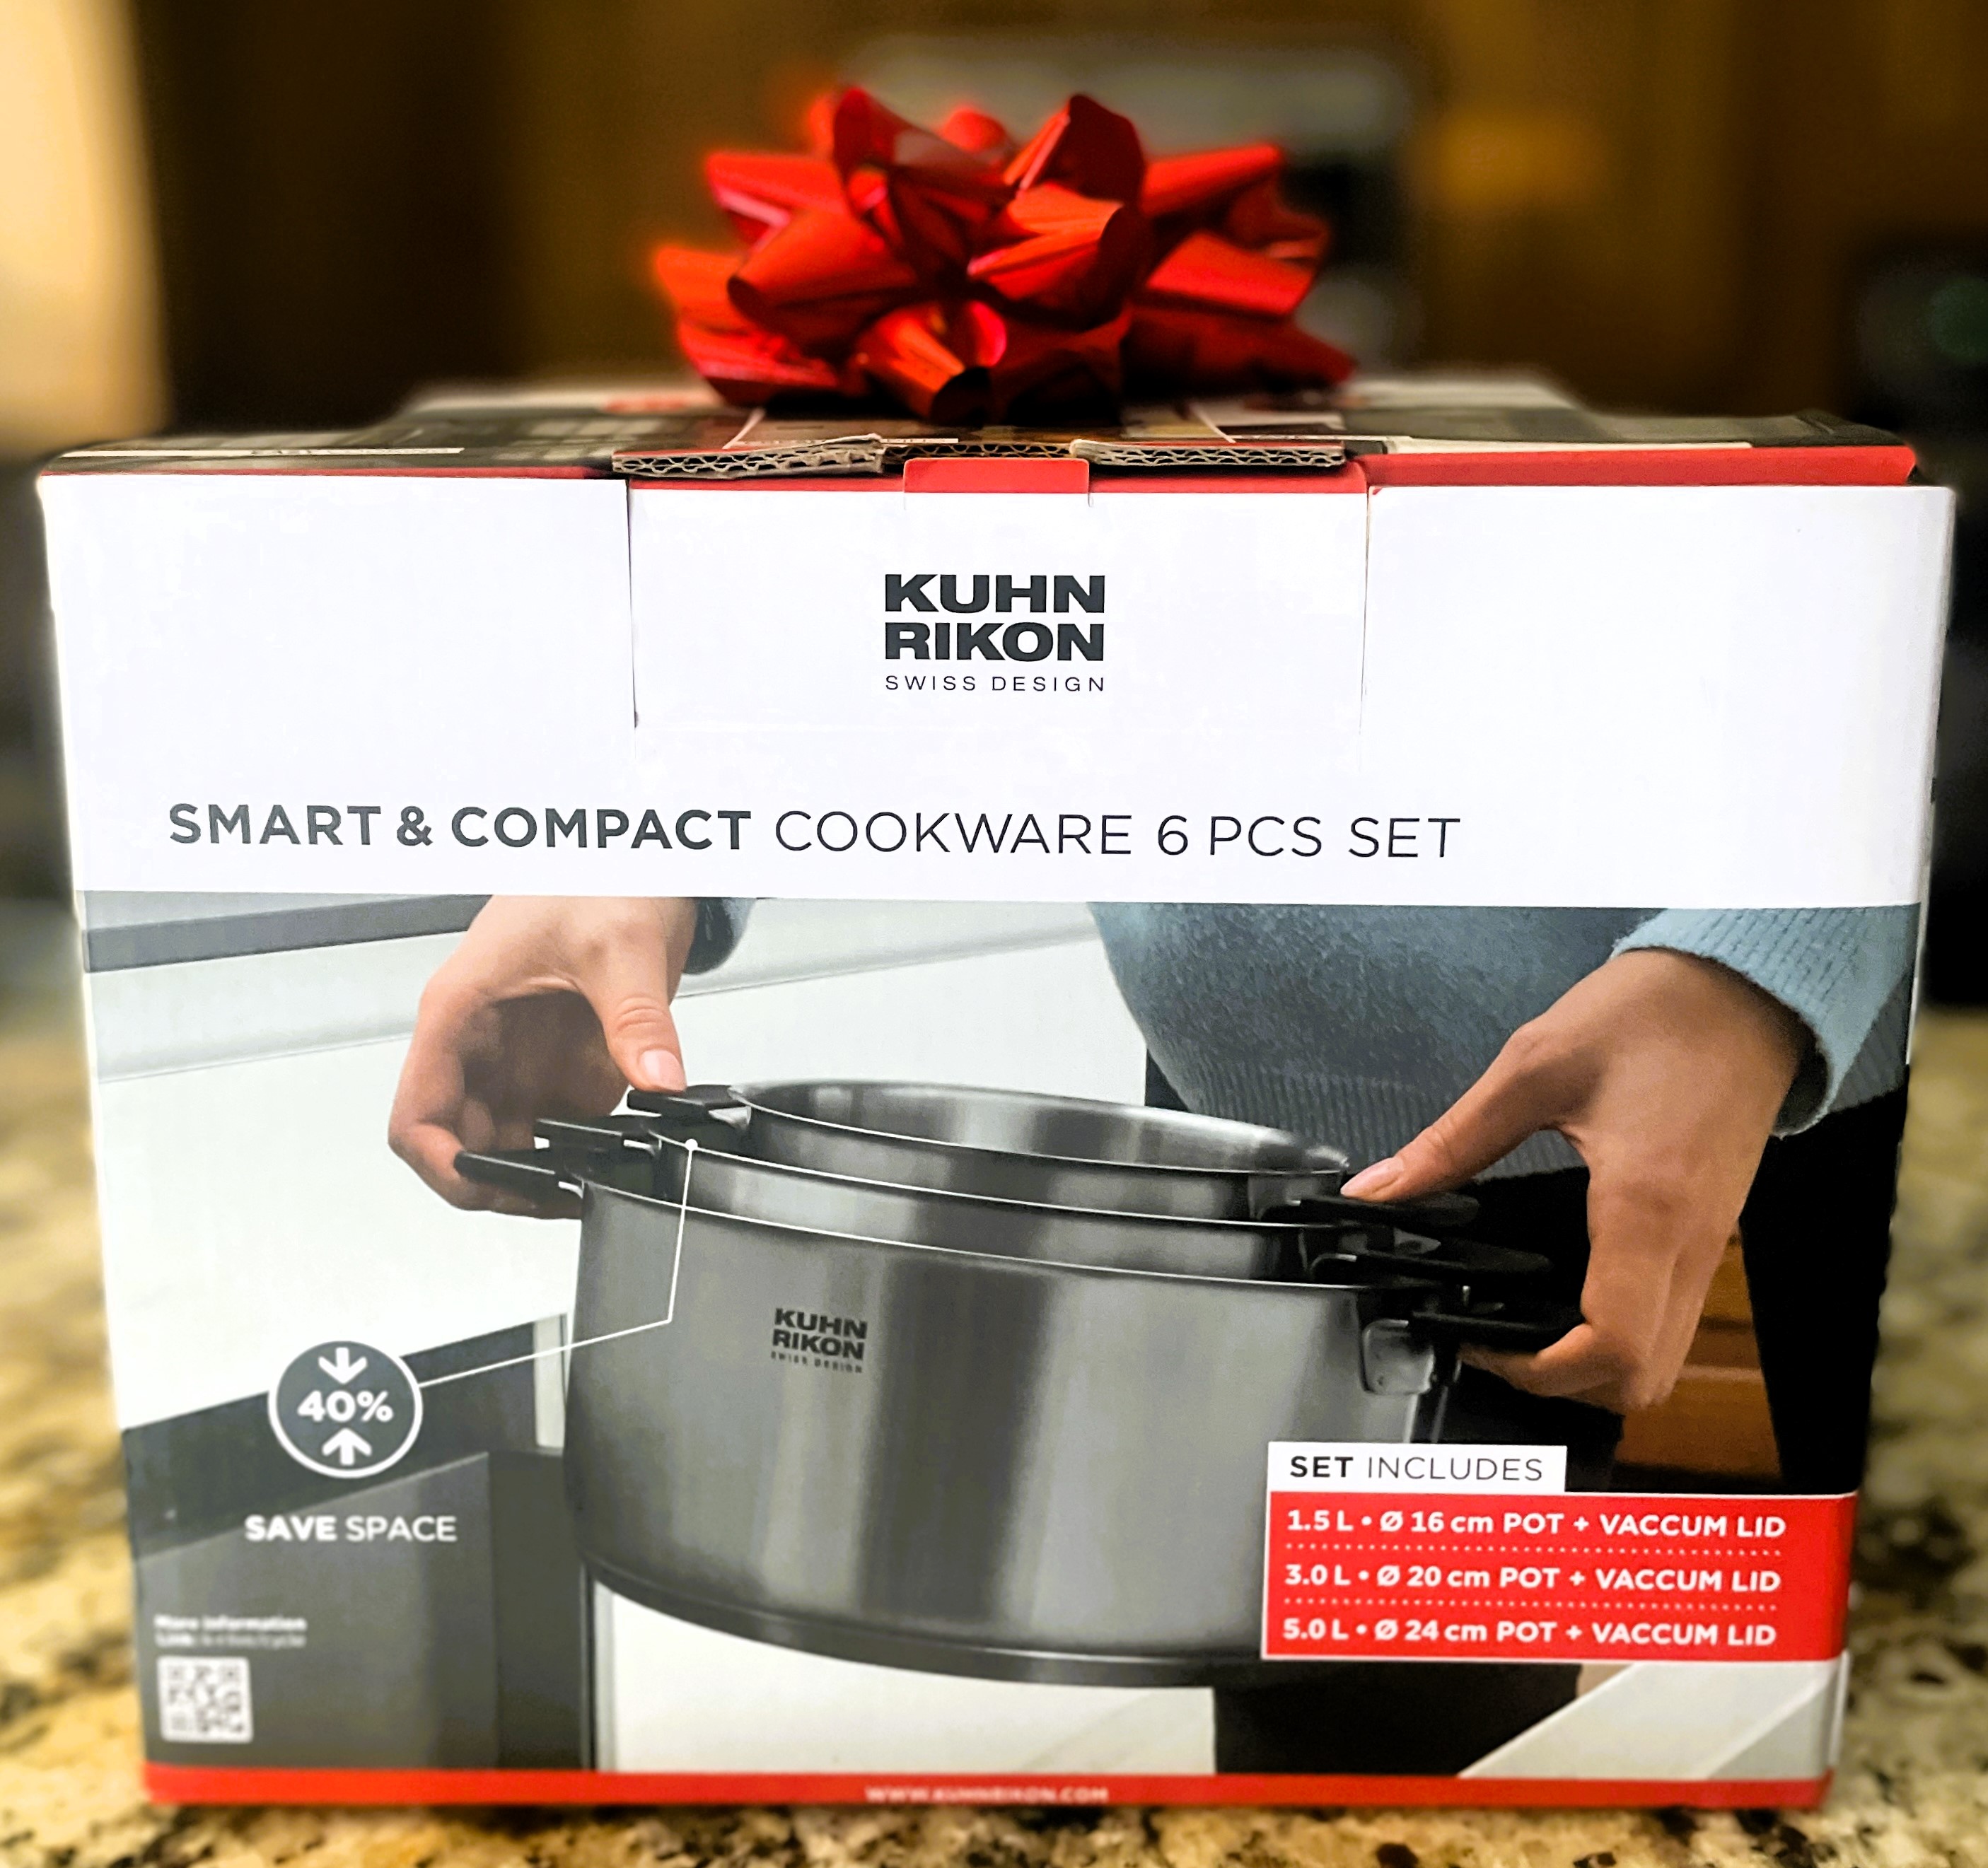 https://wehco.media.clients.ellingtoncms.com/imports/adg/photos/103020796_For-the-cook-on-your-list-who-has-a-problem-with-cabinet-space-Kuhn-Rikon-s-compact-cookware-set-is-the-answer..jpg